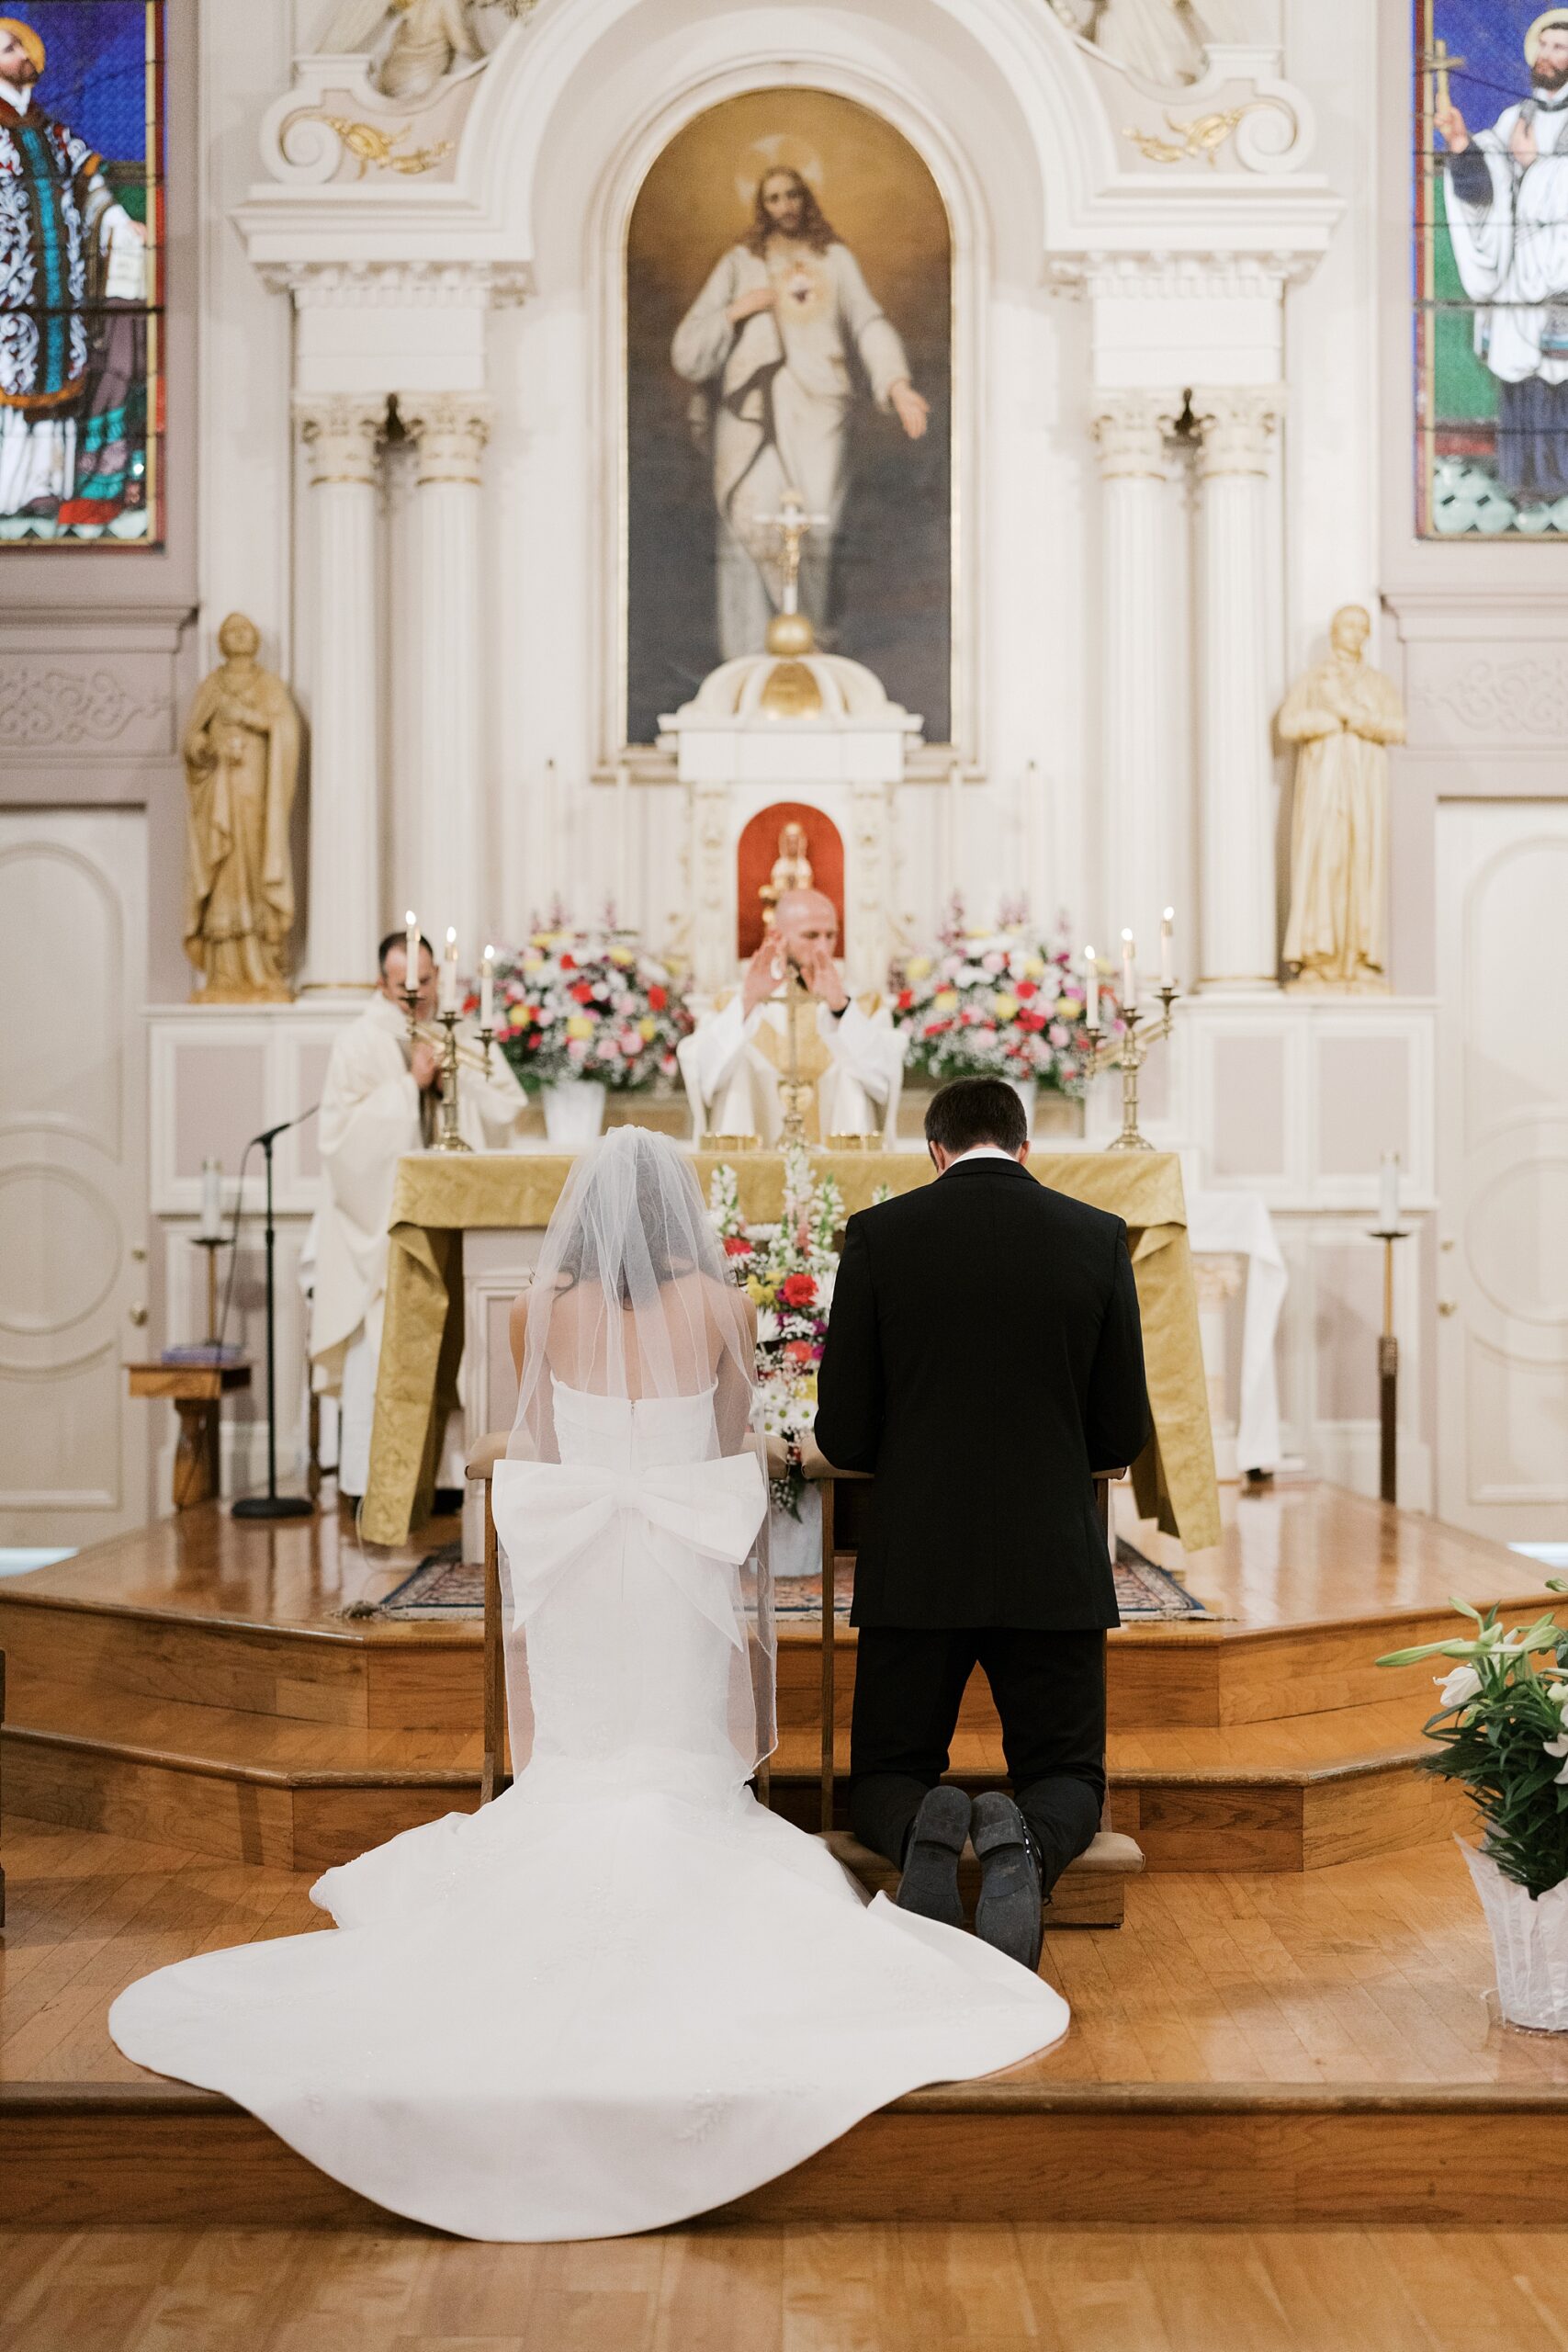 bride and groom kneel at alter during traditional catholic wedding ceremony inside St. Charles Borromeo